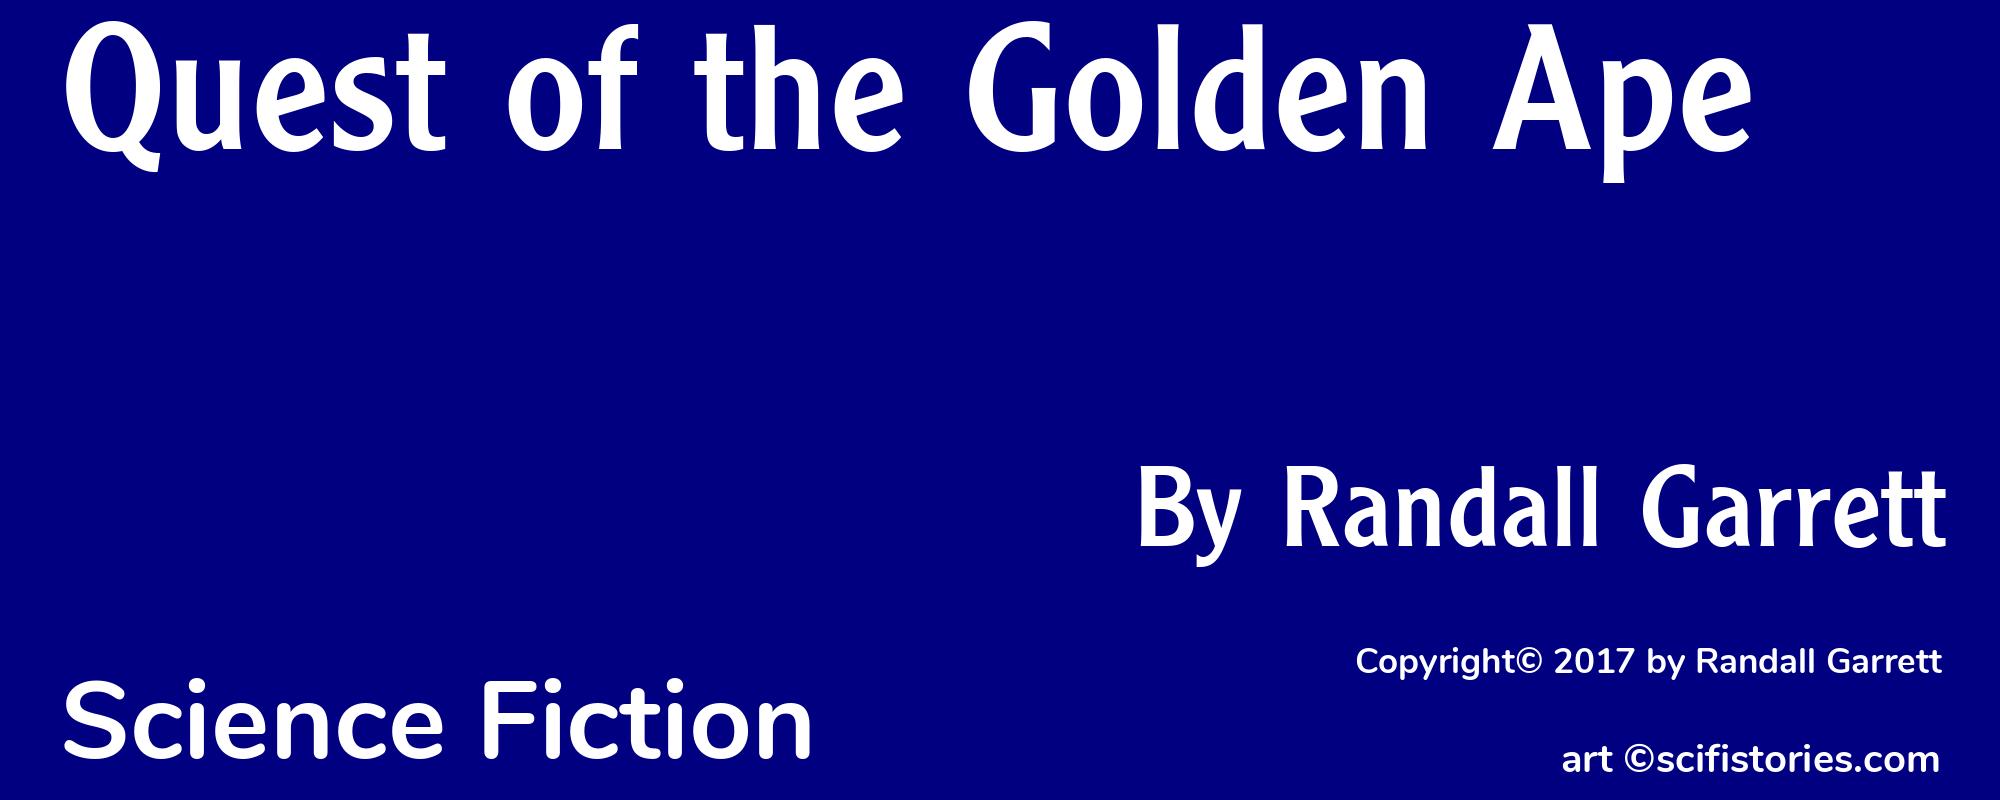 Quest of the Golden Ape - Cover